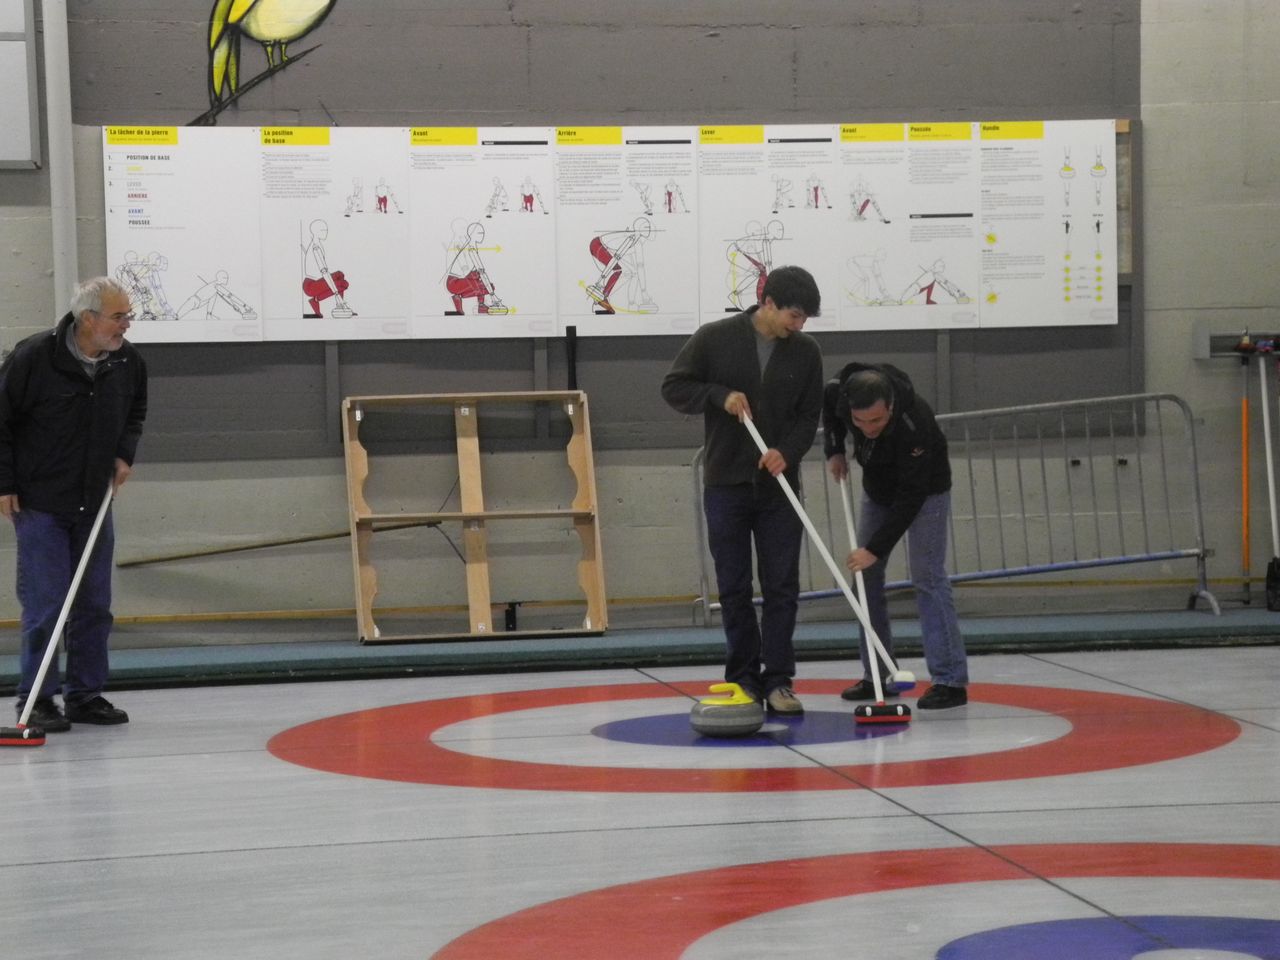 /photos/2013/S01_Curling/121011_2103-S01-MD_15.jpg